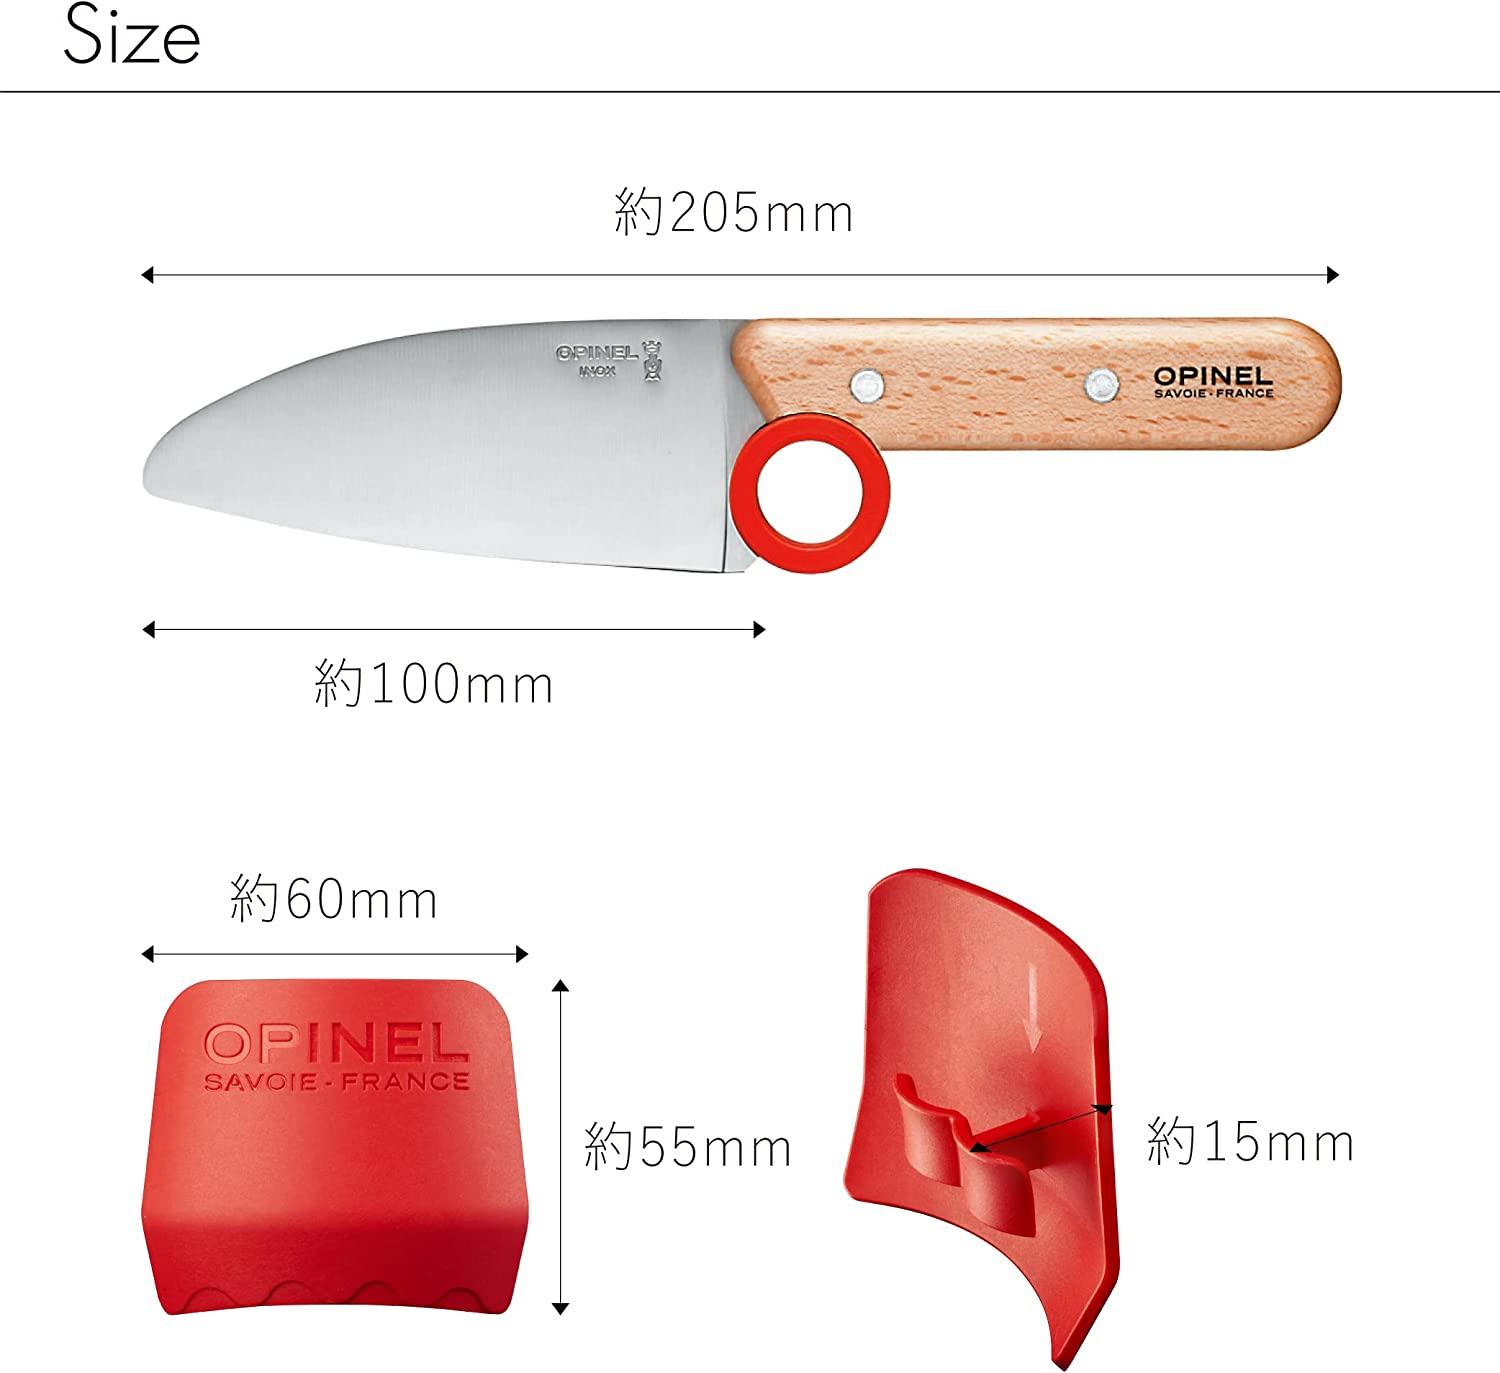 Opinel Le Petit Chef Knife Set, Chef Knife with Rounded Tip, Fingers Guard,  For Children, Teaching Food Prep and Kitchen Safety, 2 Piece Set, Made in